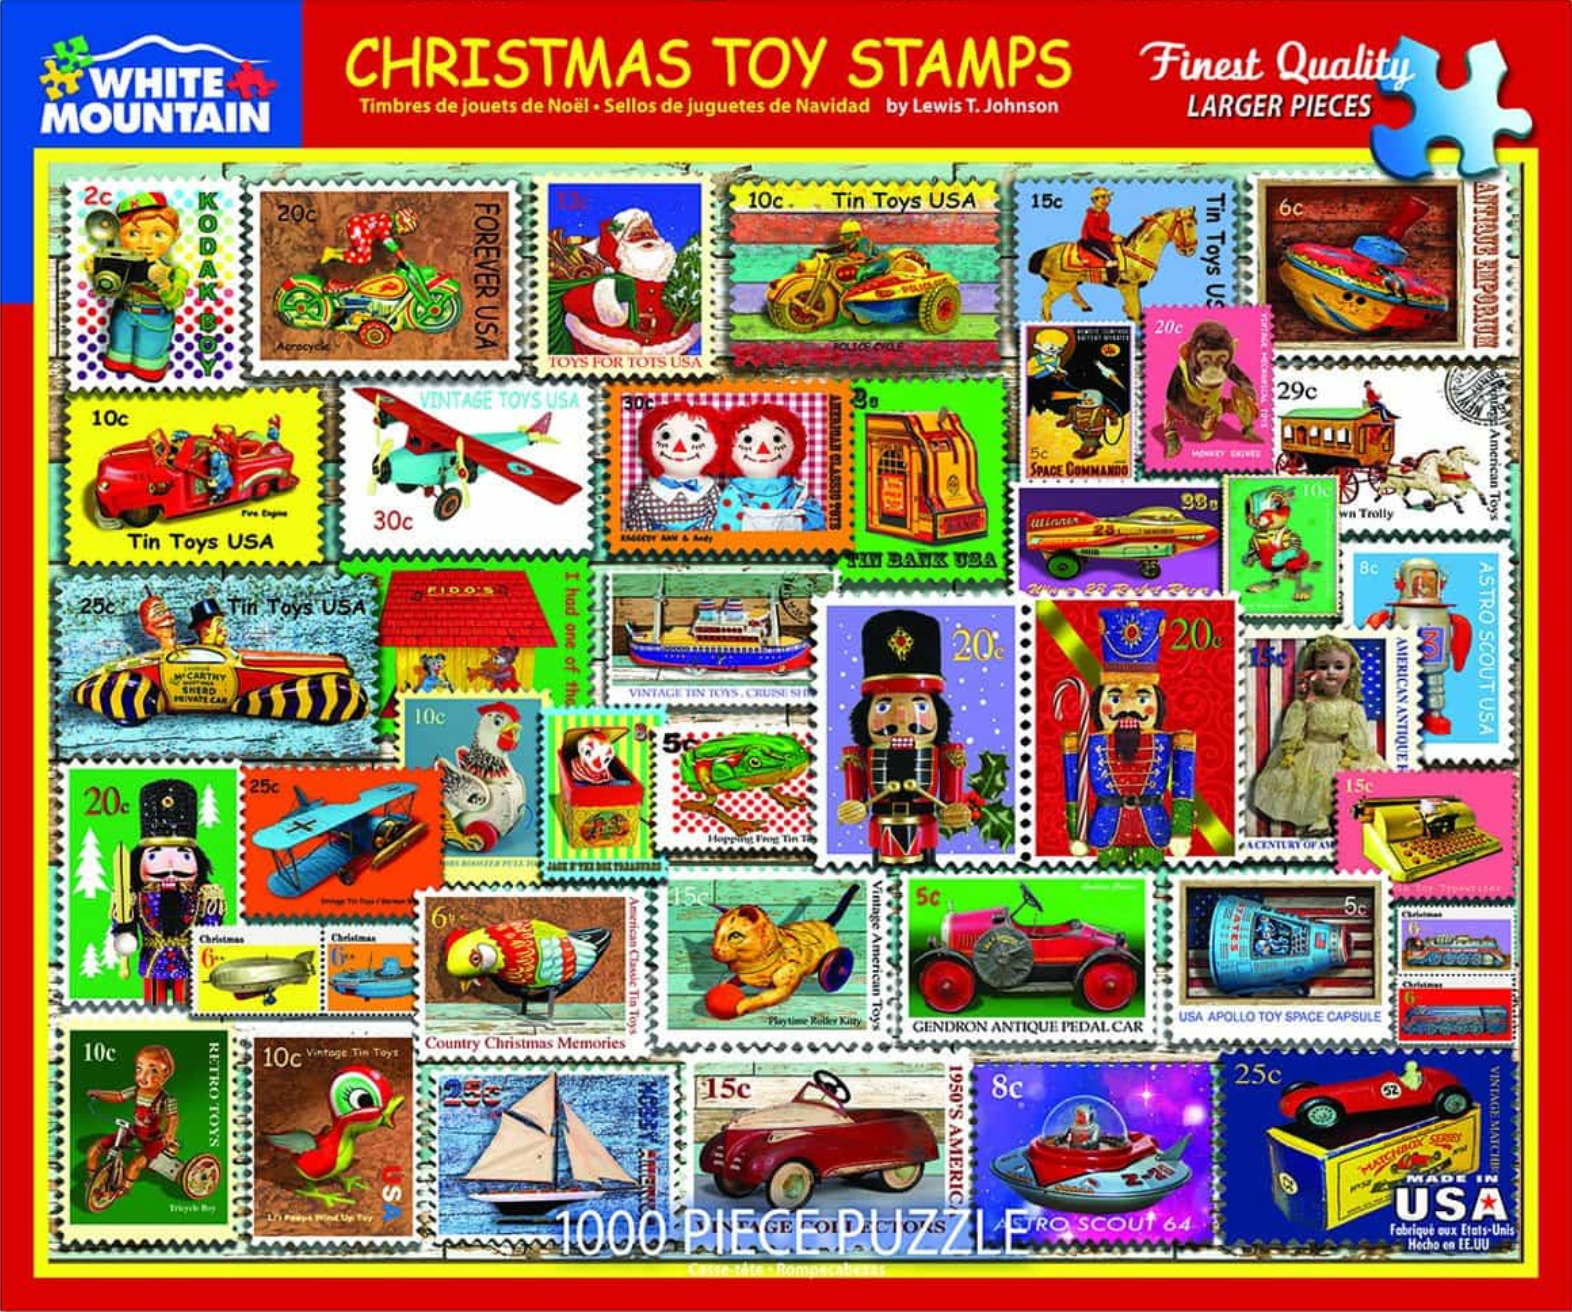 Christmas Toy Stamps (1000 pc puzzle)